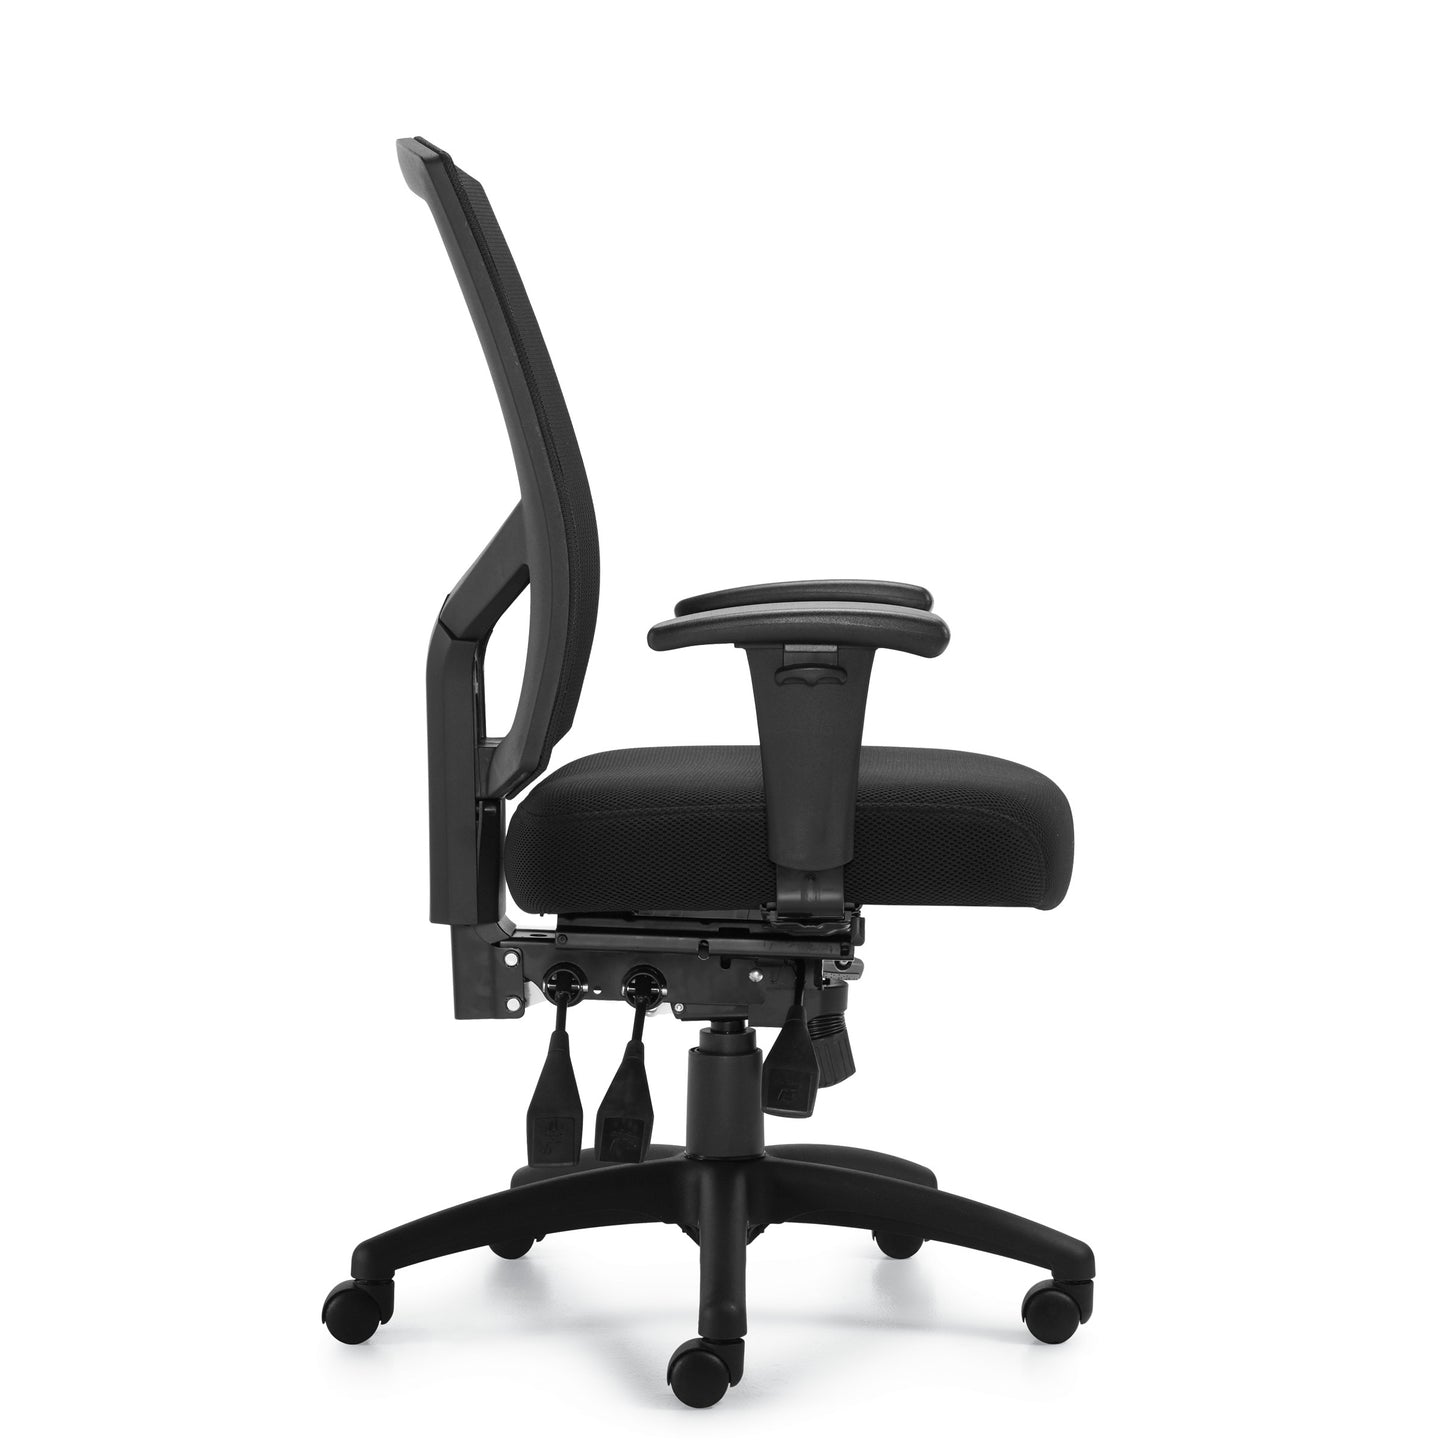 Mesh Back Multi-Function Chair with Arms - OTG 11769B